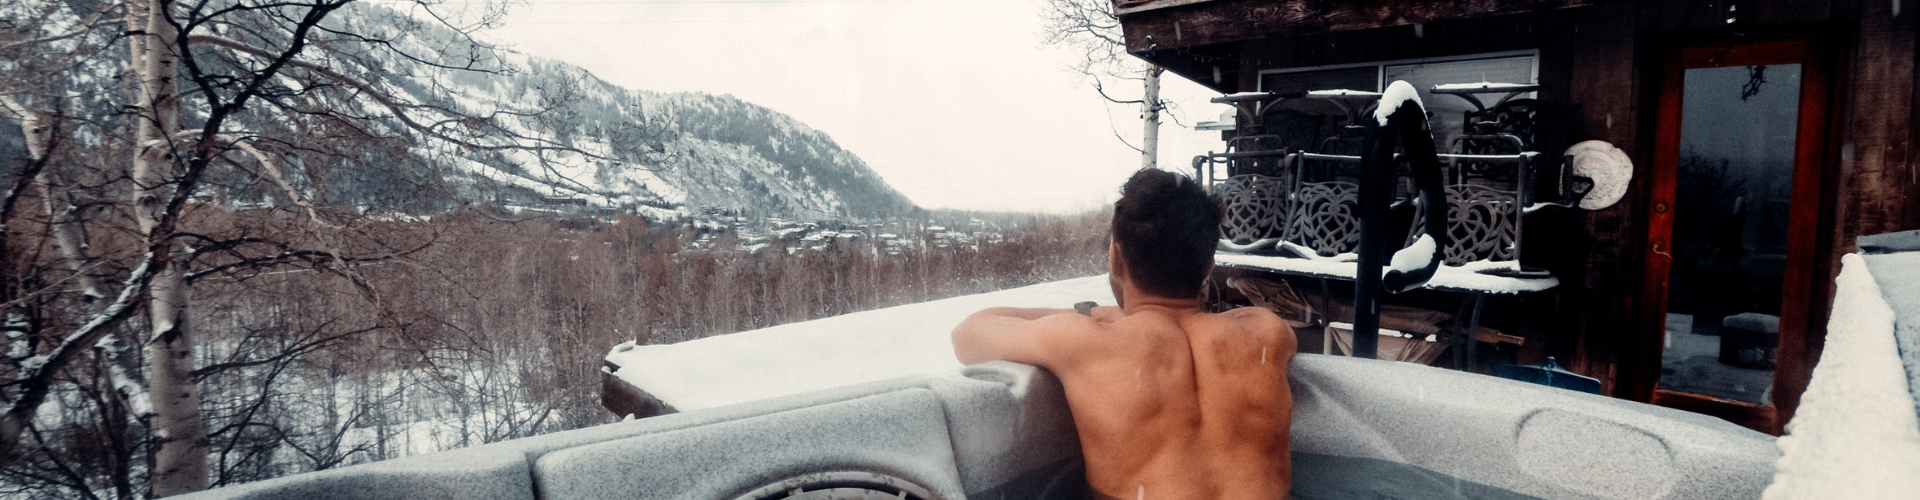 man sitting in an outdoor hot tub during the winter